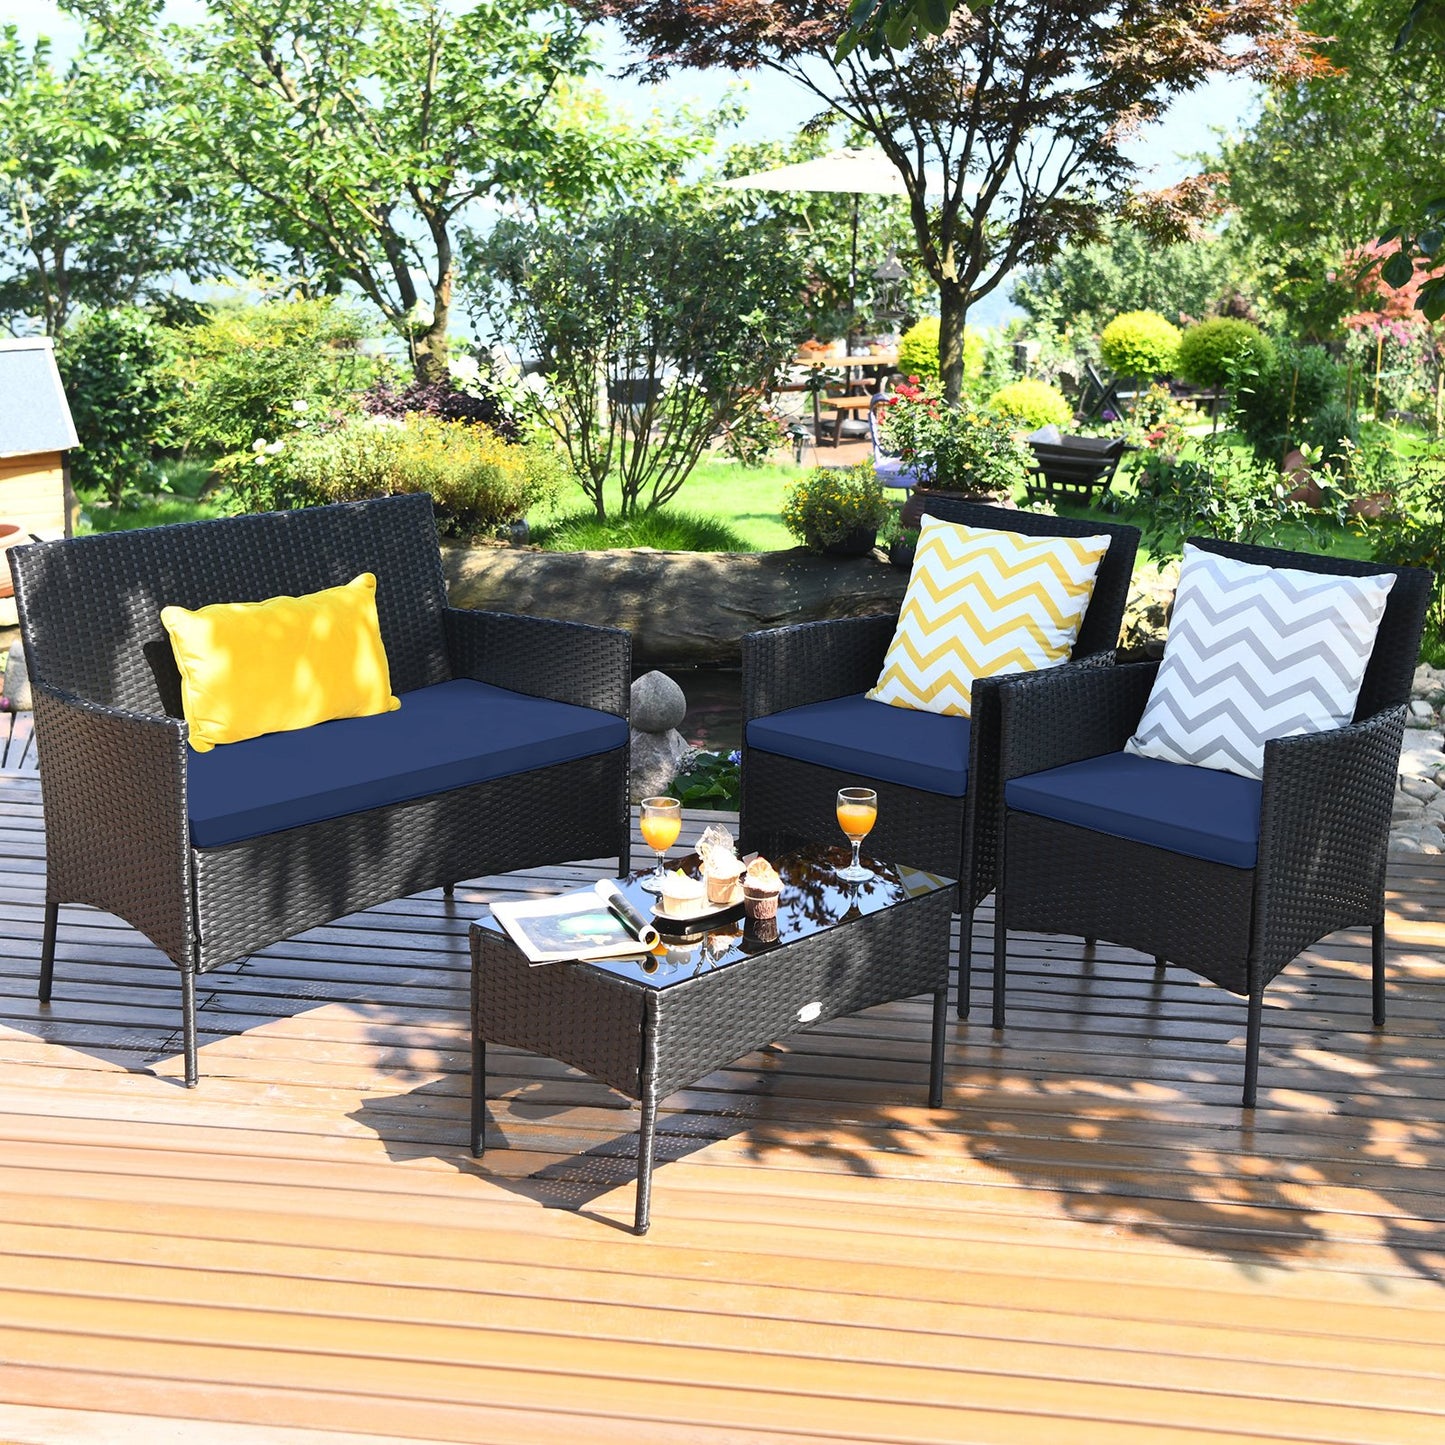 4 Pieces Patio Rattan Cushioned Sofa Set with Tempered Glass Coffee Table-Navy and off White, Navy & Off White